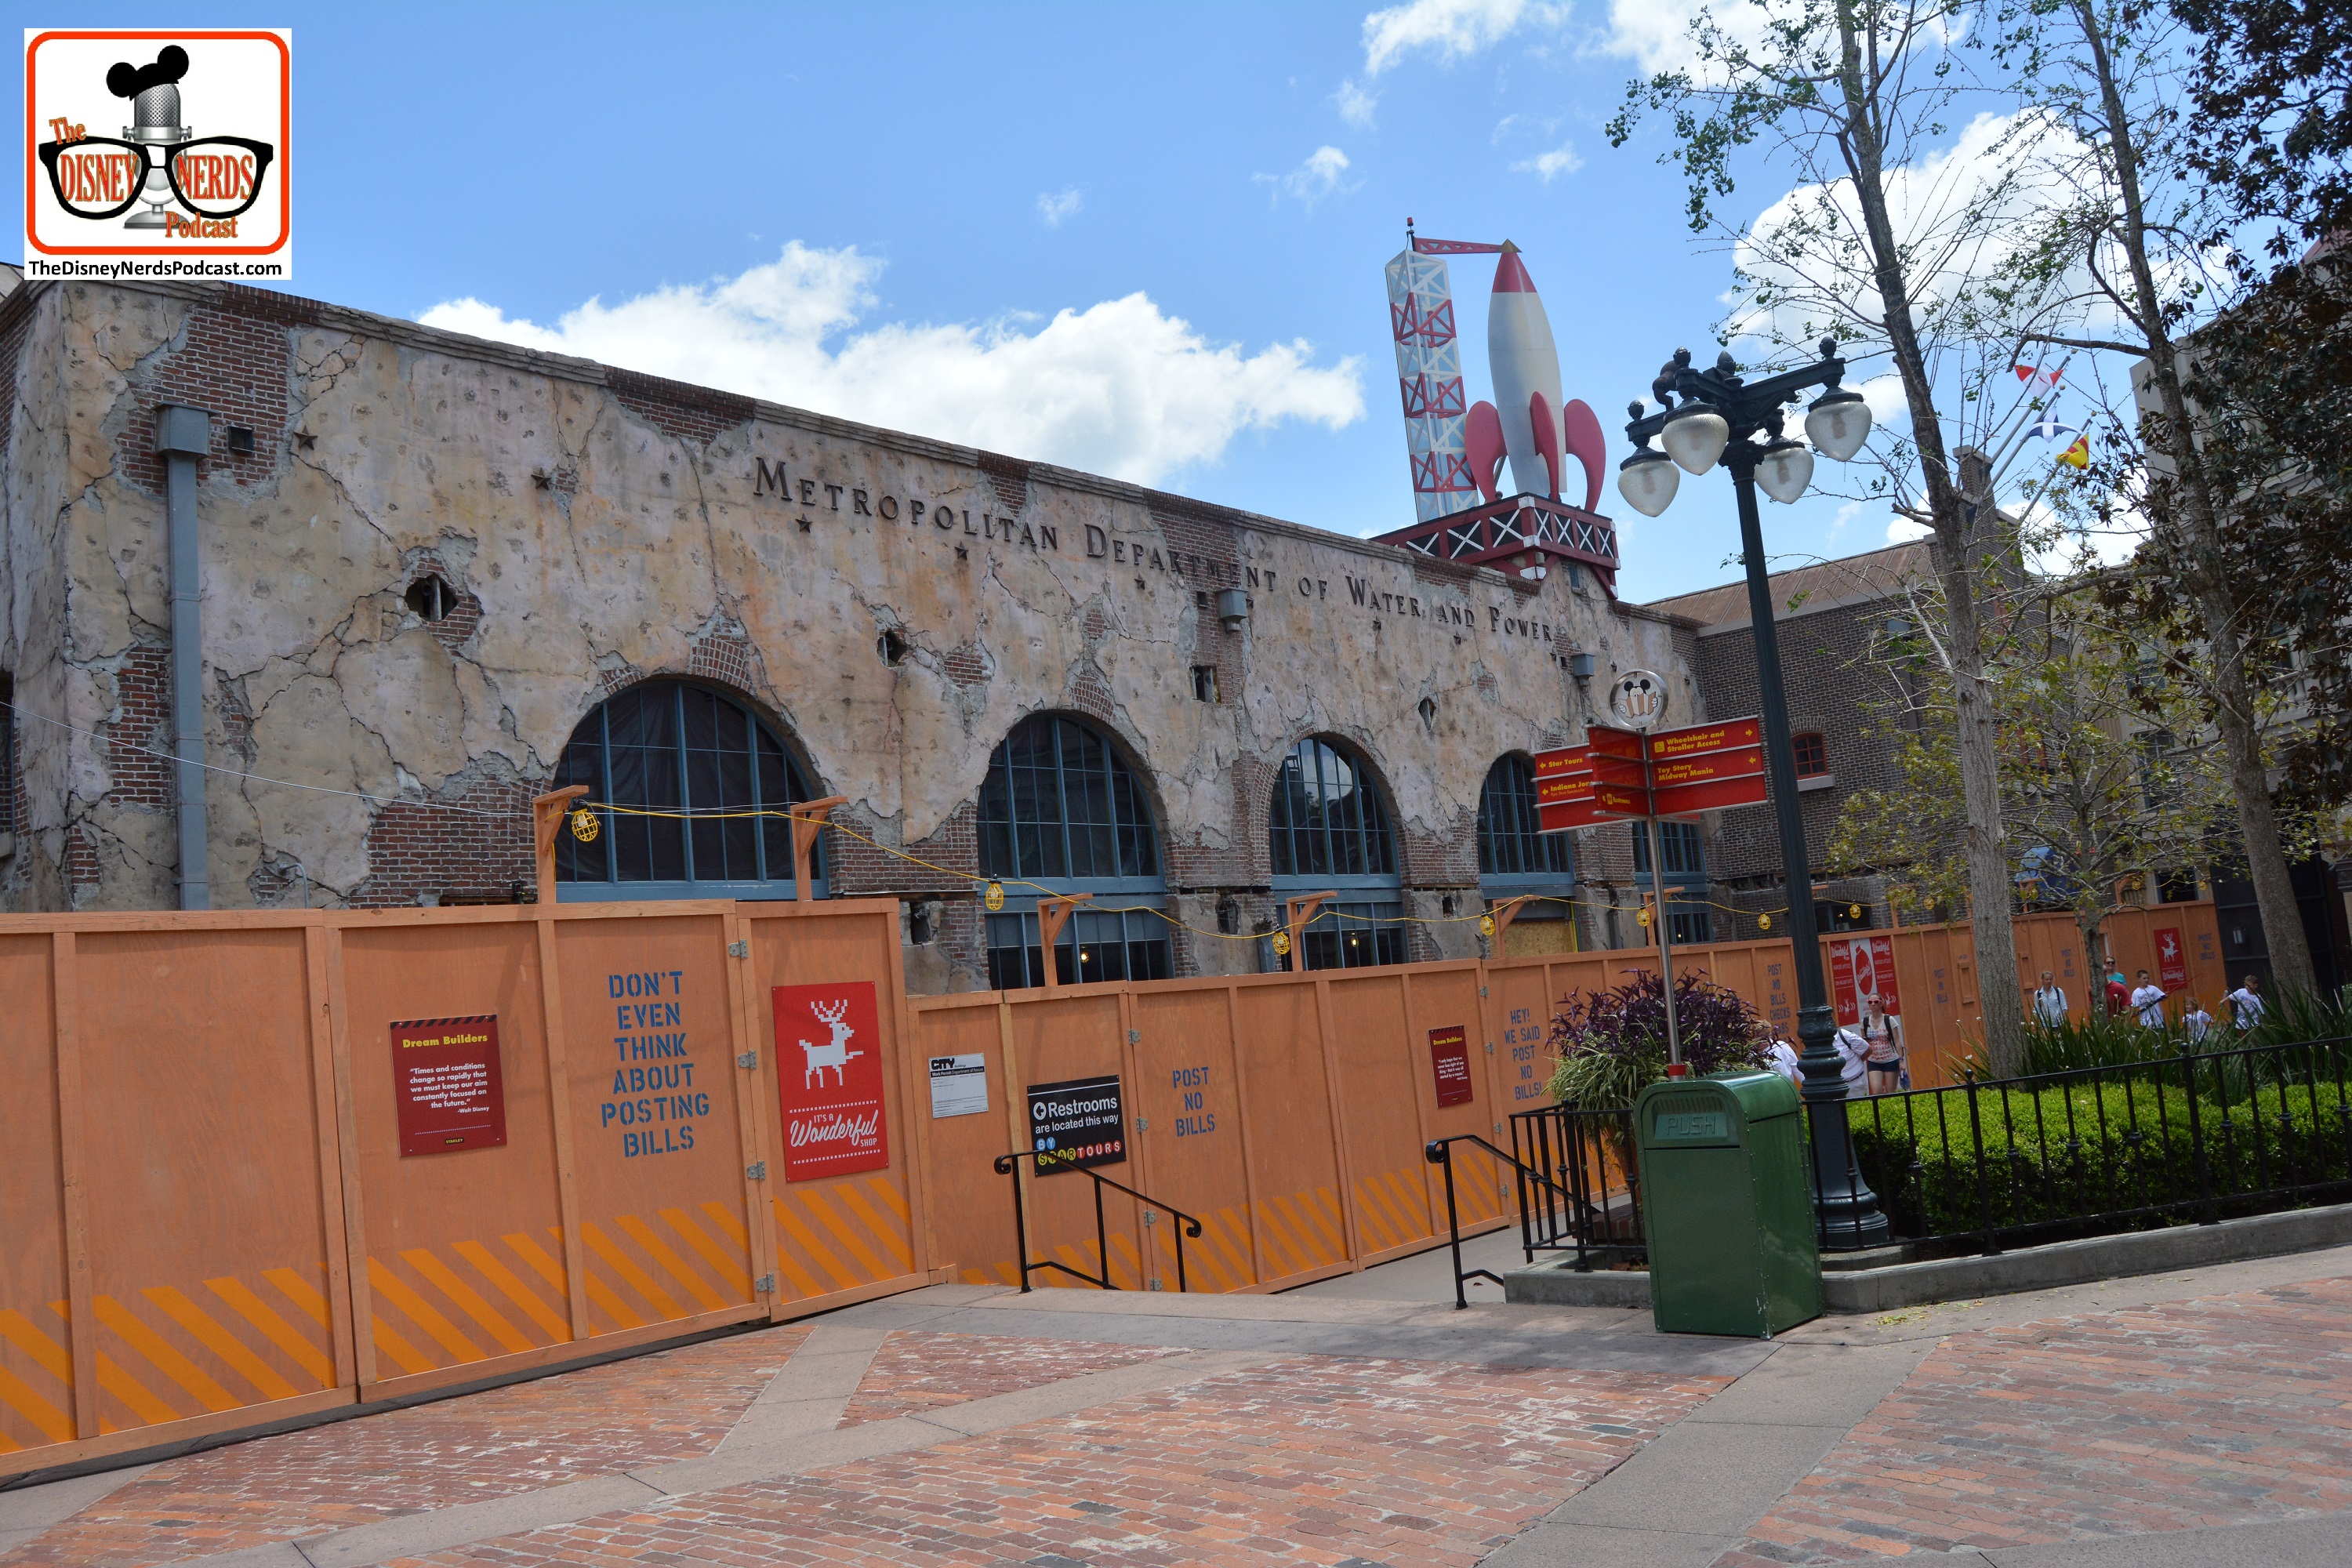 DNP April 2016 Photo Report: The Former Pizza Planet behind construction walls.